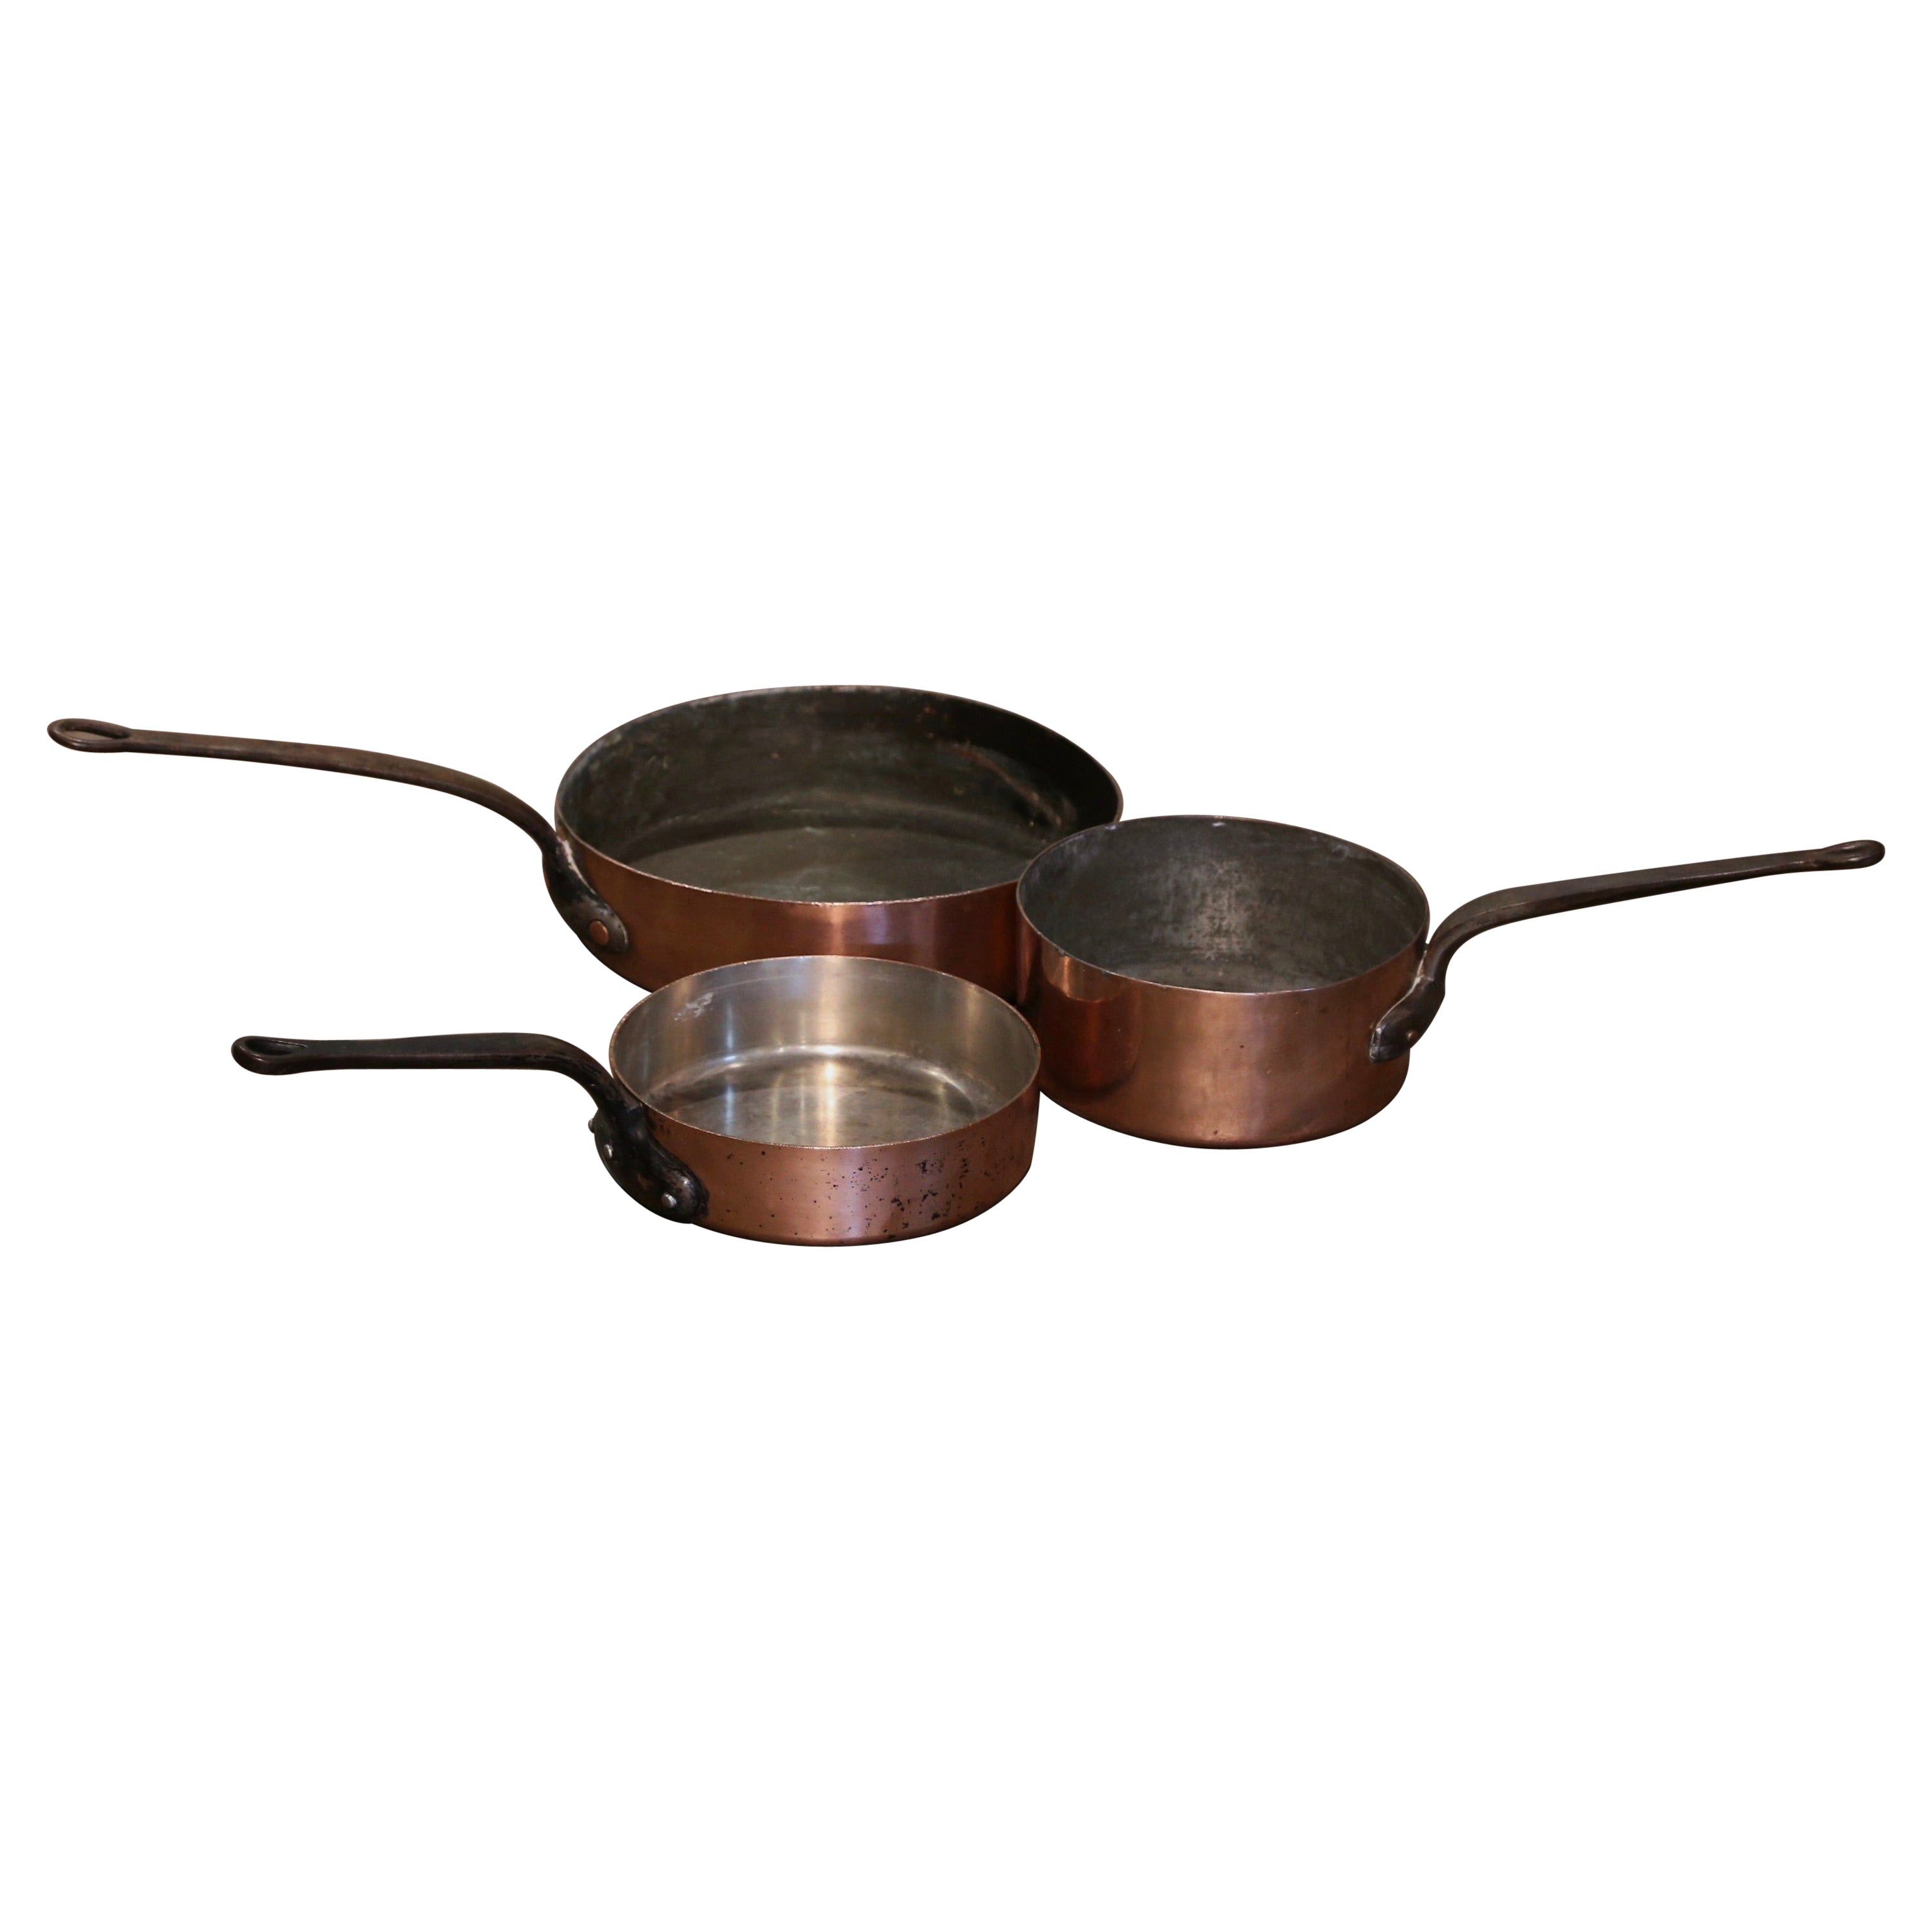 19th Century French Polished Copper and Wrought Iron Cooking Pans, Set of 3